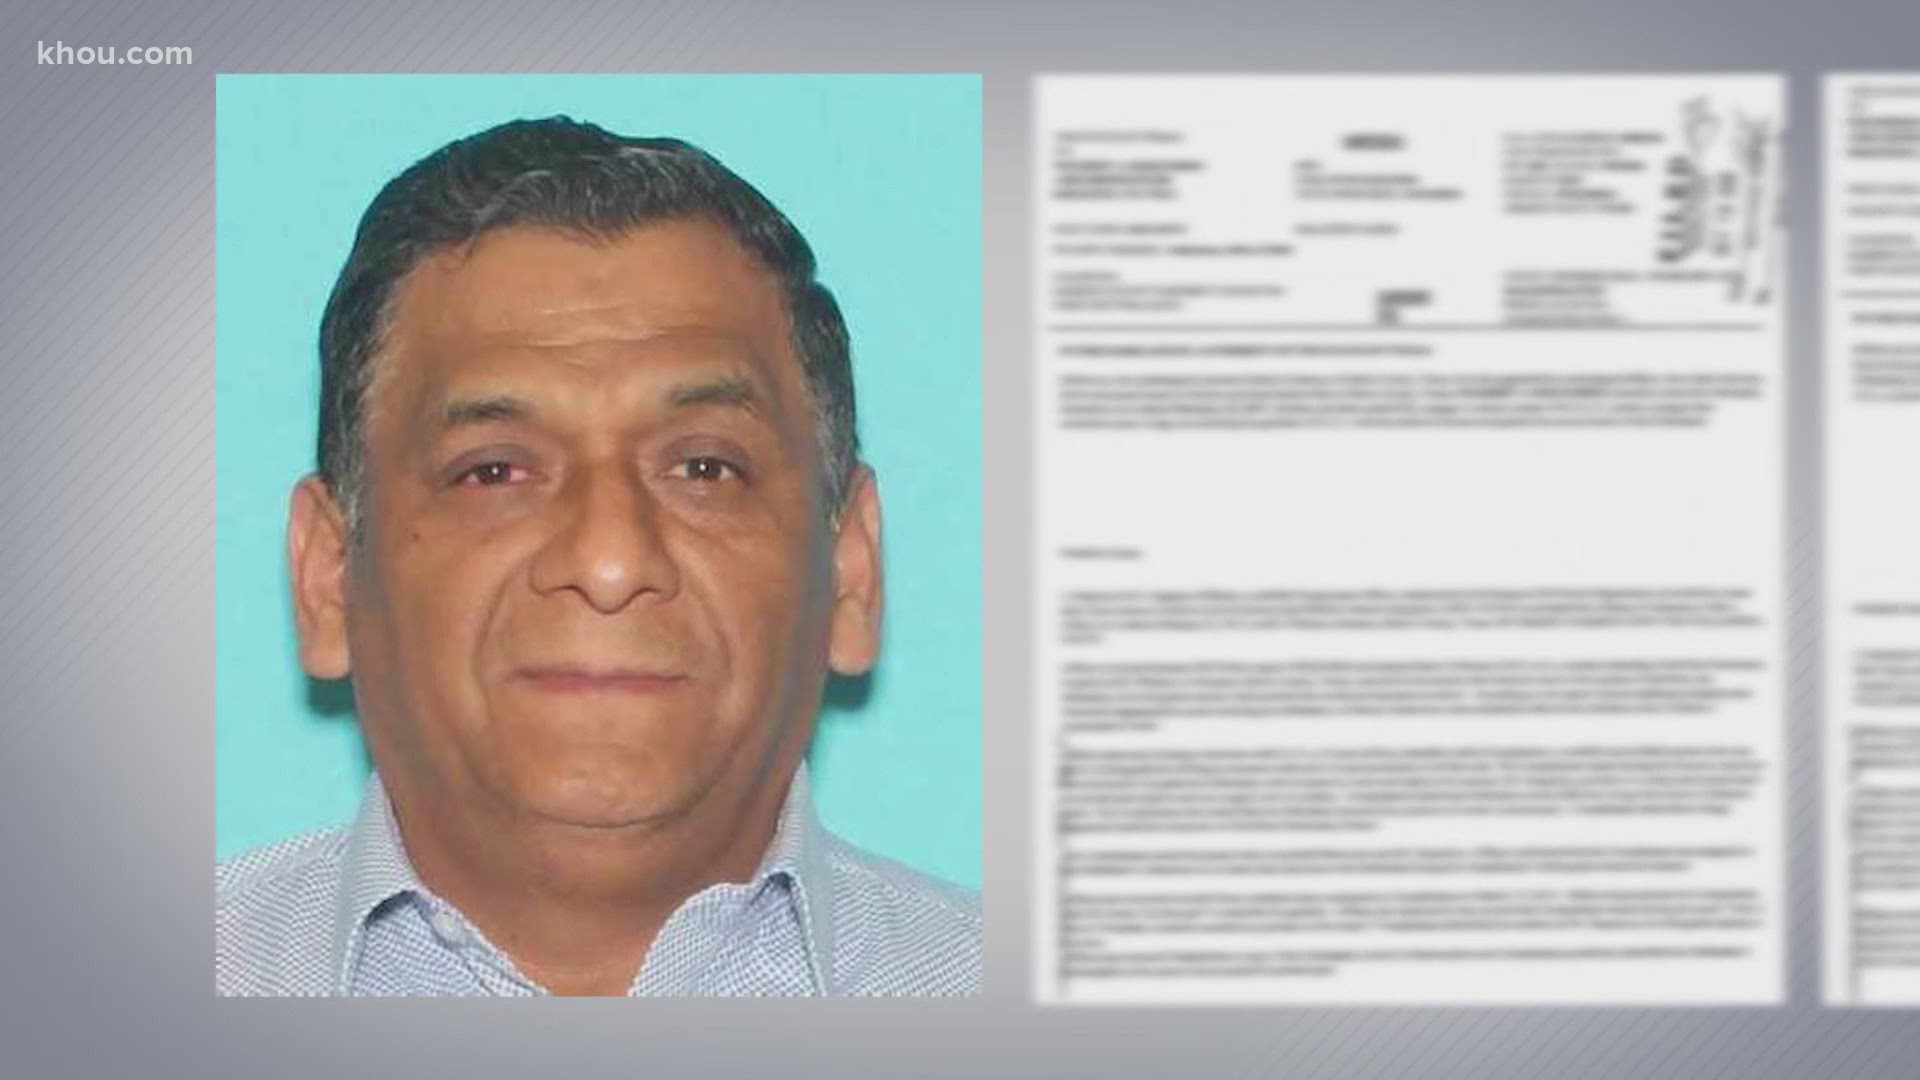 Houston authorities are searching Wilbert Sequeiros, 54, who is charged with indecency with a child and sexual assault. Police believe there could be other victims.